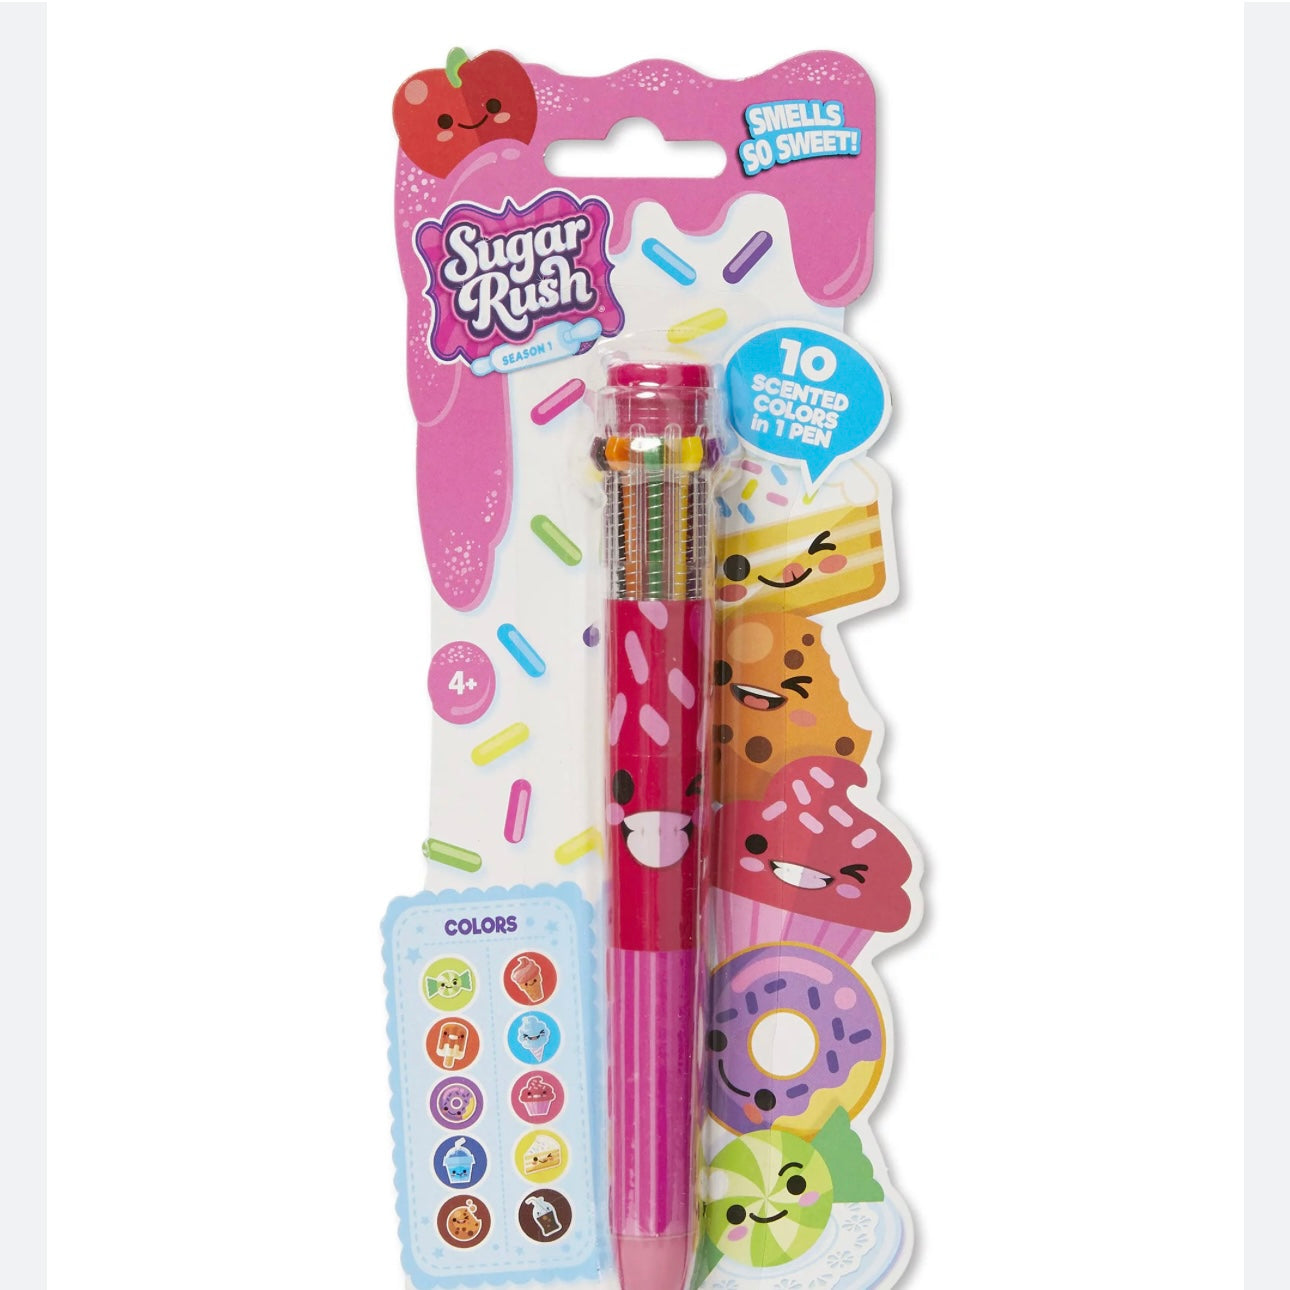 Sugar Rush Candy Scented Pens Markers and Stationery